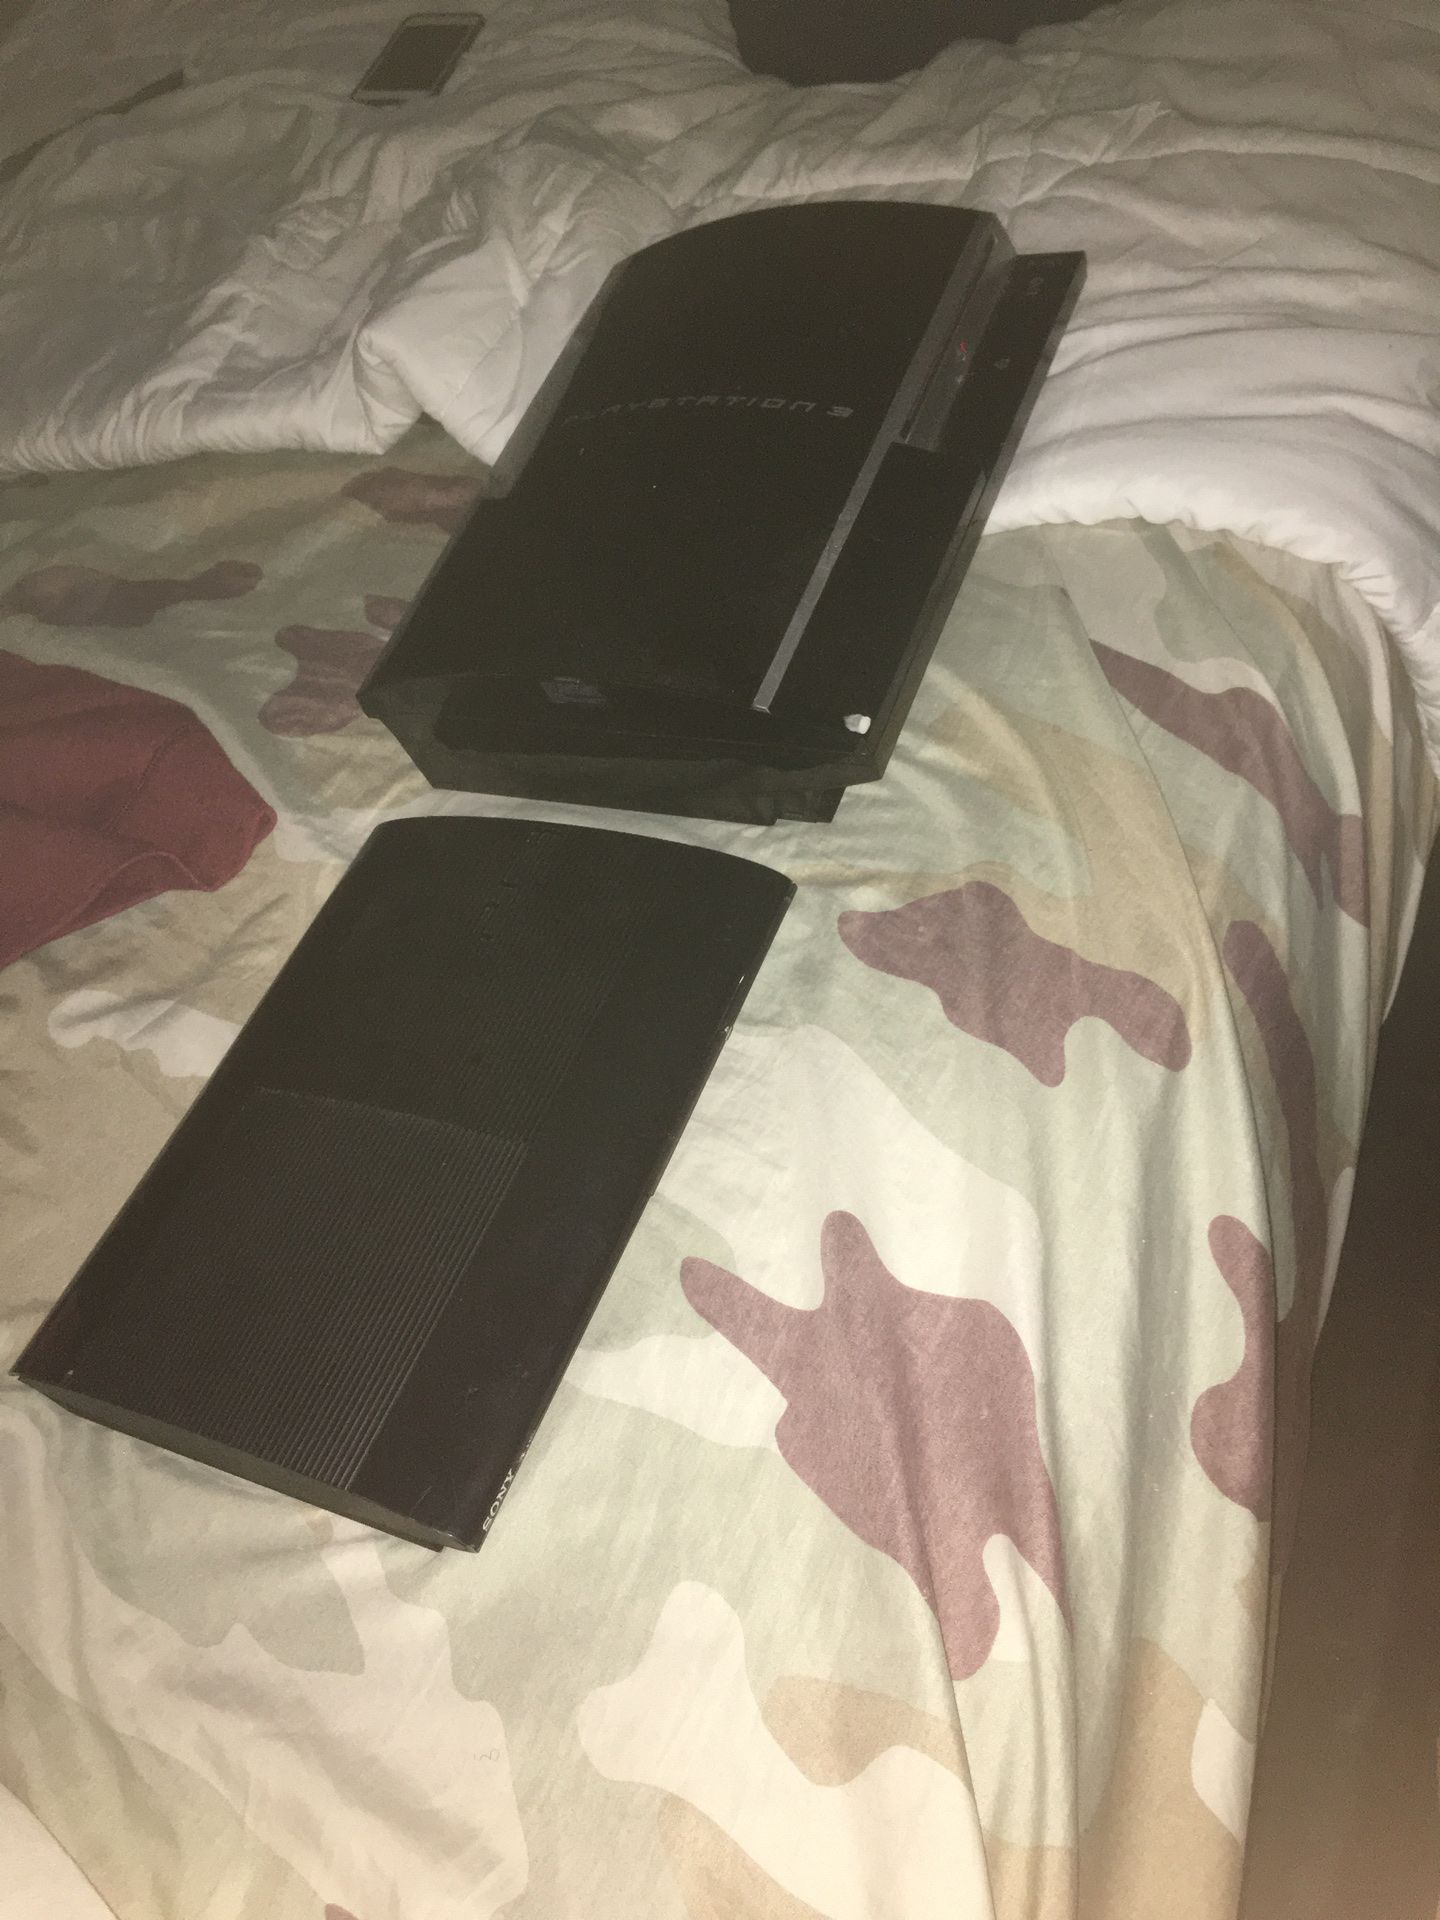 PS3 2 for 1